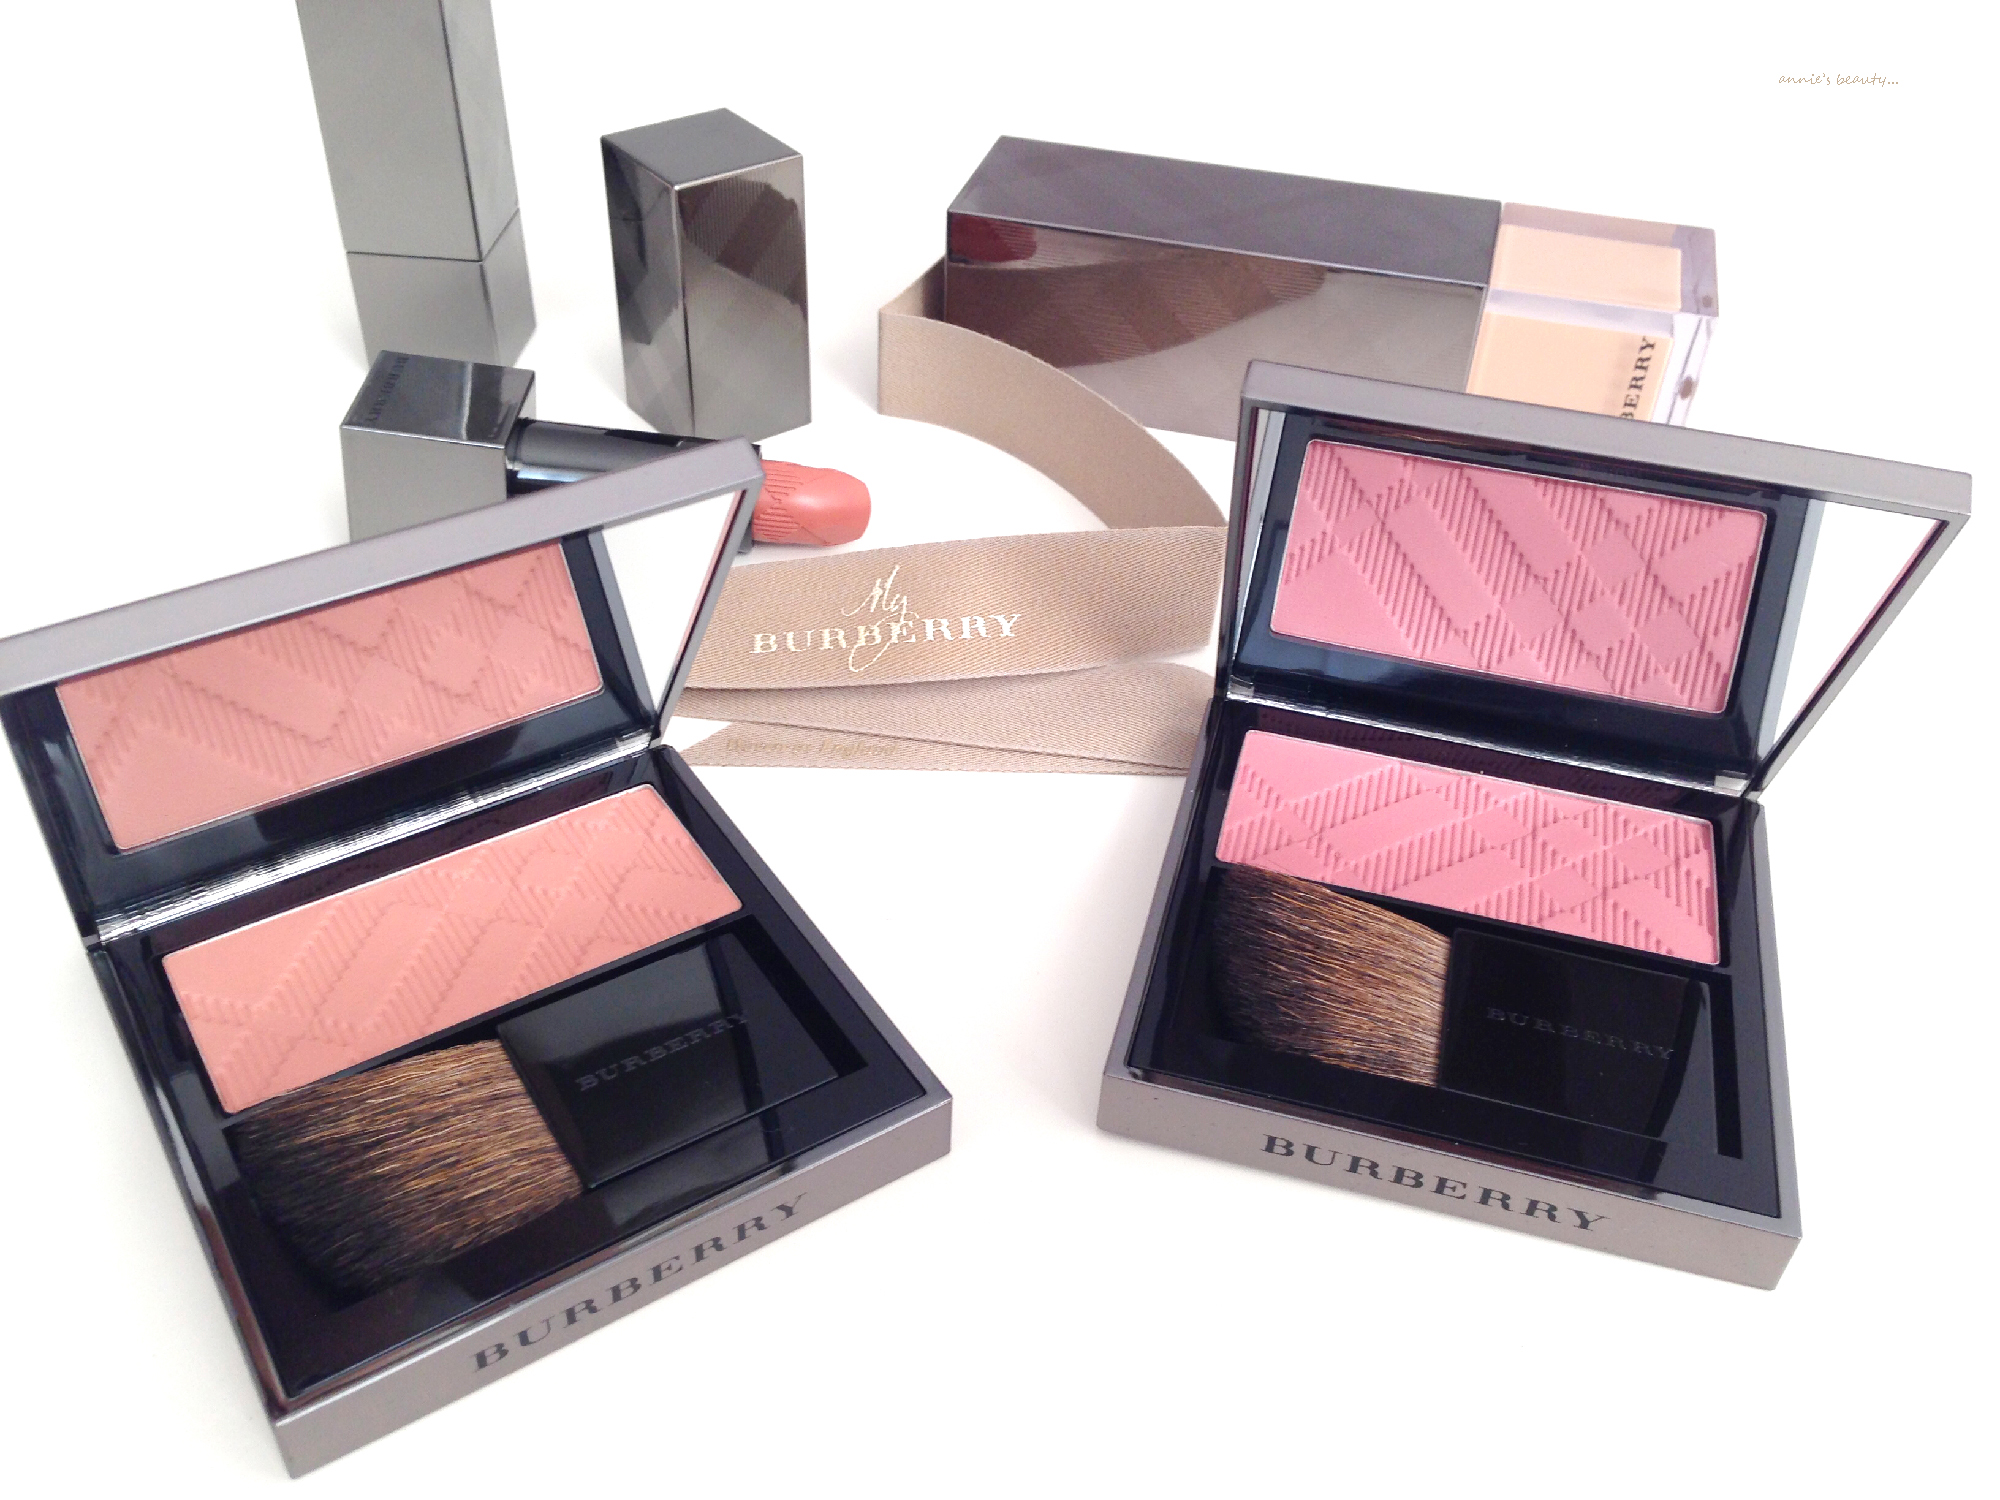 BURBERRY Light Glow in #02 Cameo and #06 Tangerine, two beautiful blushes  for autumn | Mami și Zâna